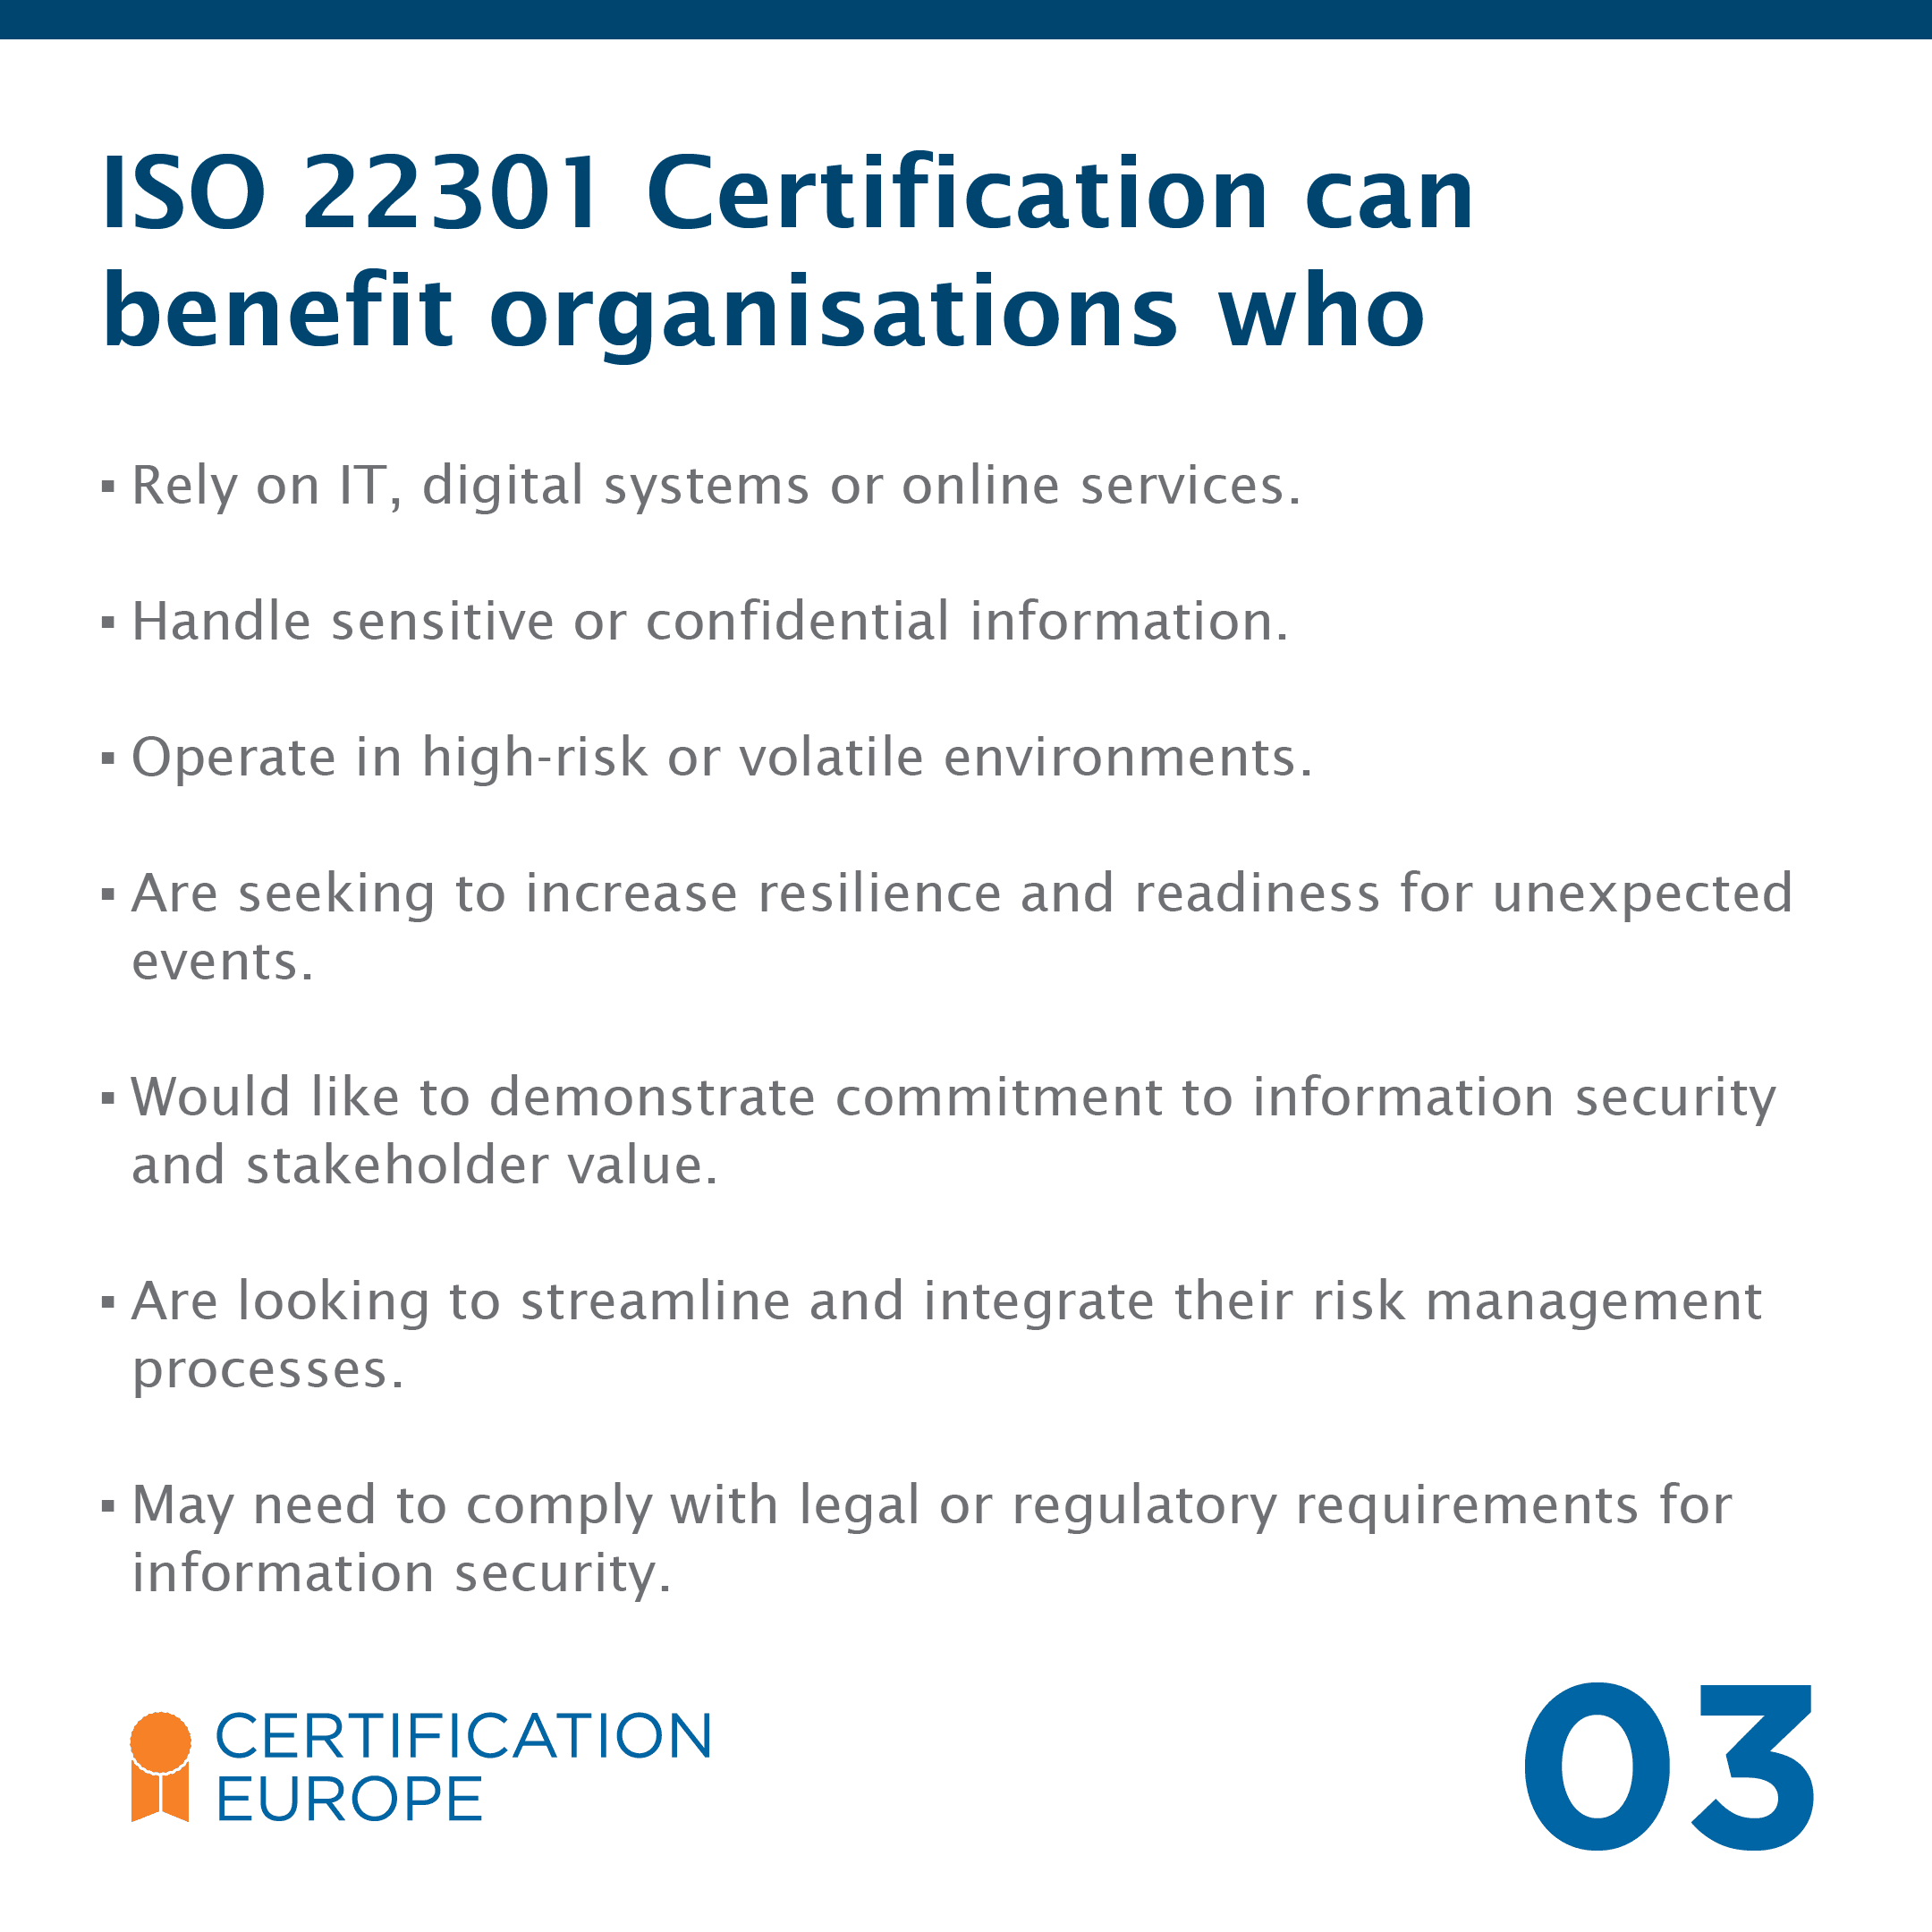 Key benefits of ISO 22301 Certification - 3